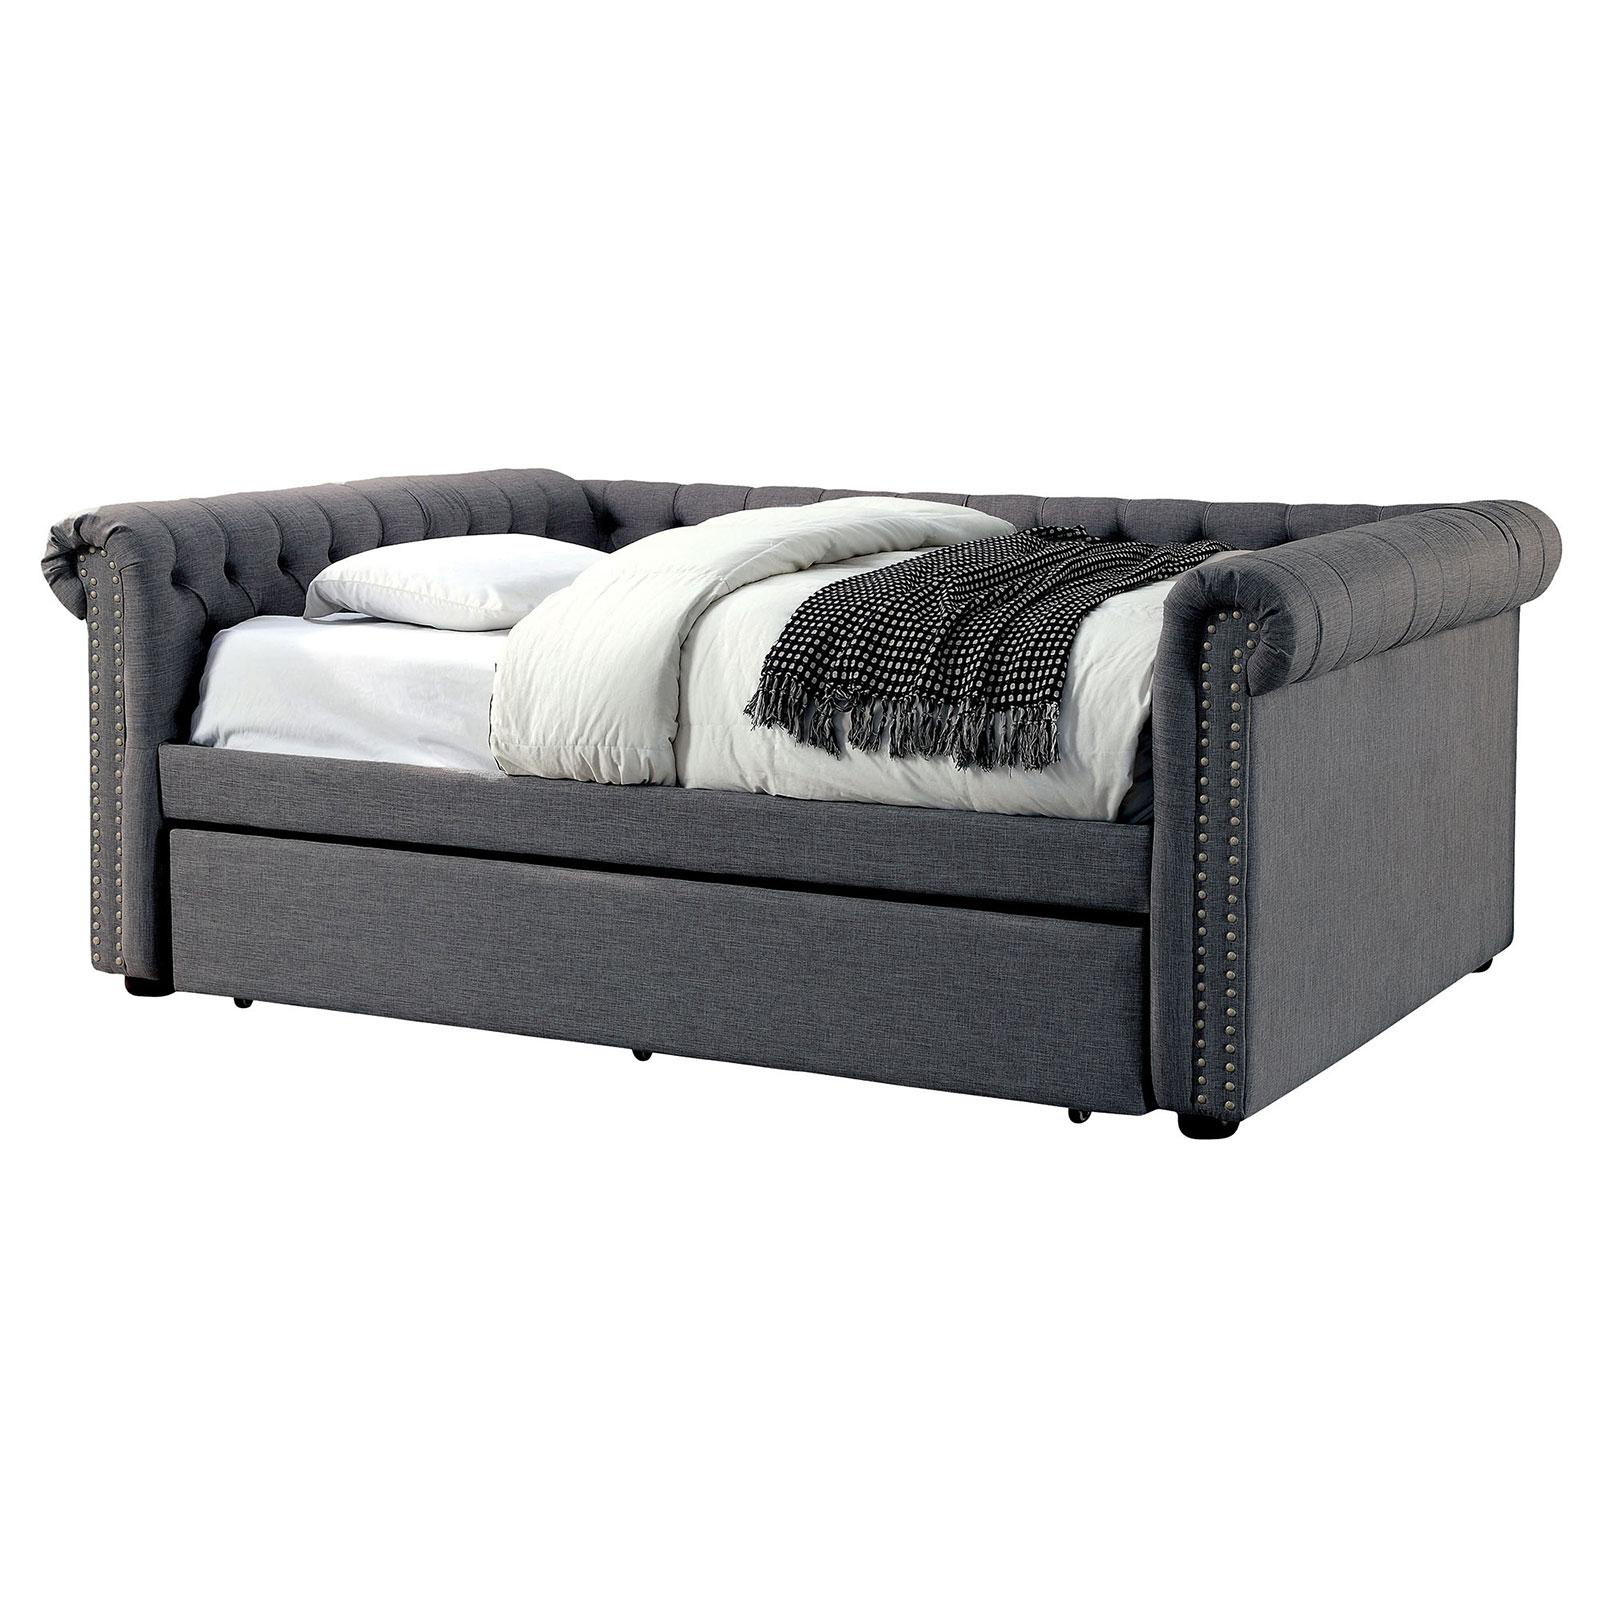 Contemporary Daybed LEANNA CM1027GY-BED-F CM1027GY-BED-F in Gray Fabric